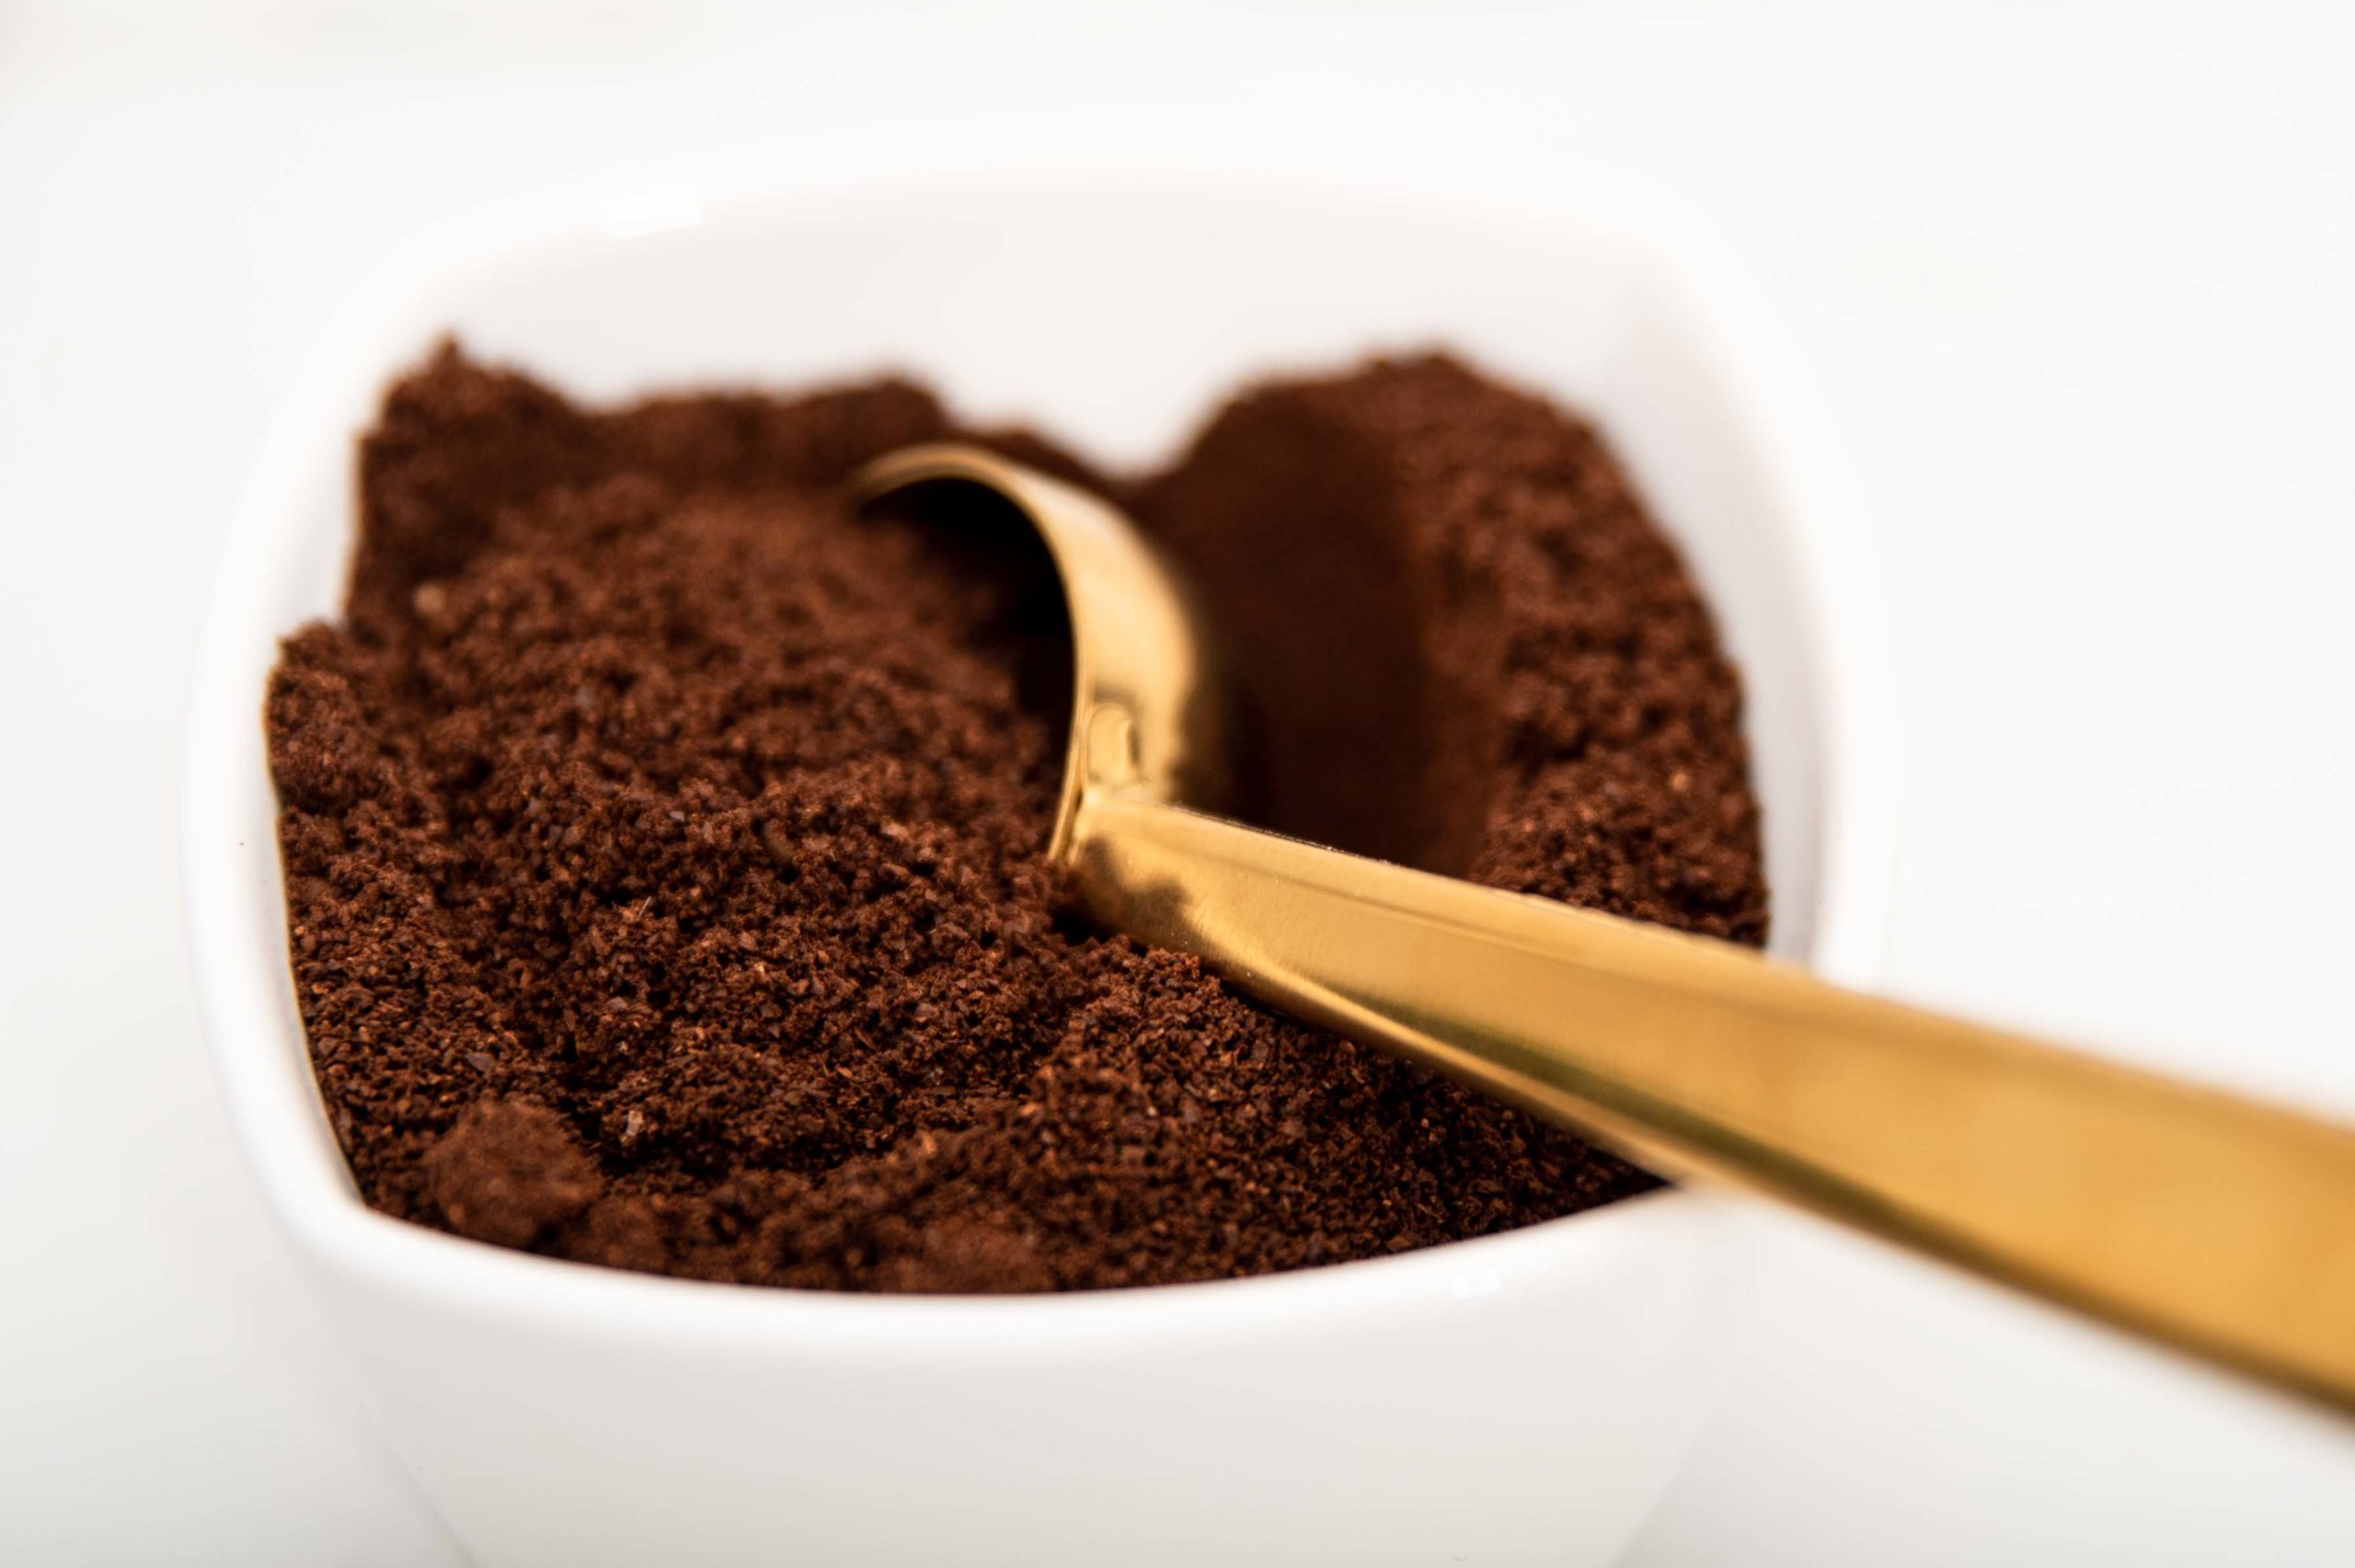 Should You Buy Ground Coffee?